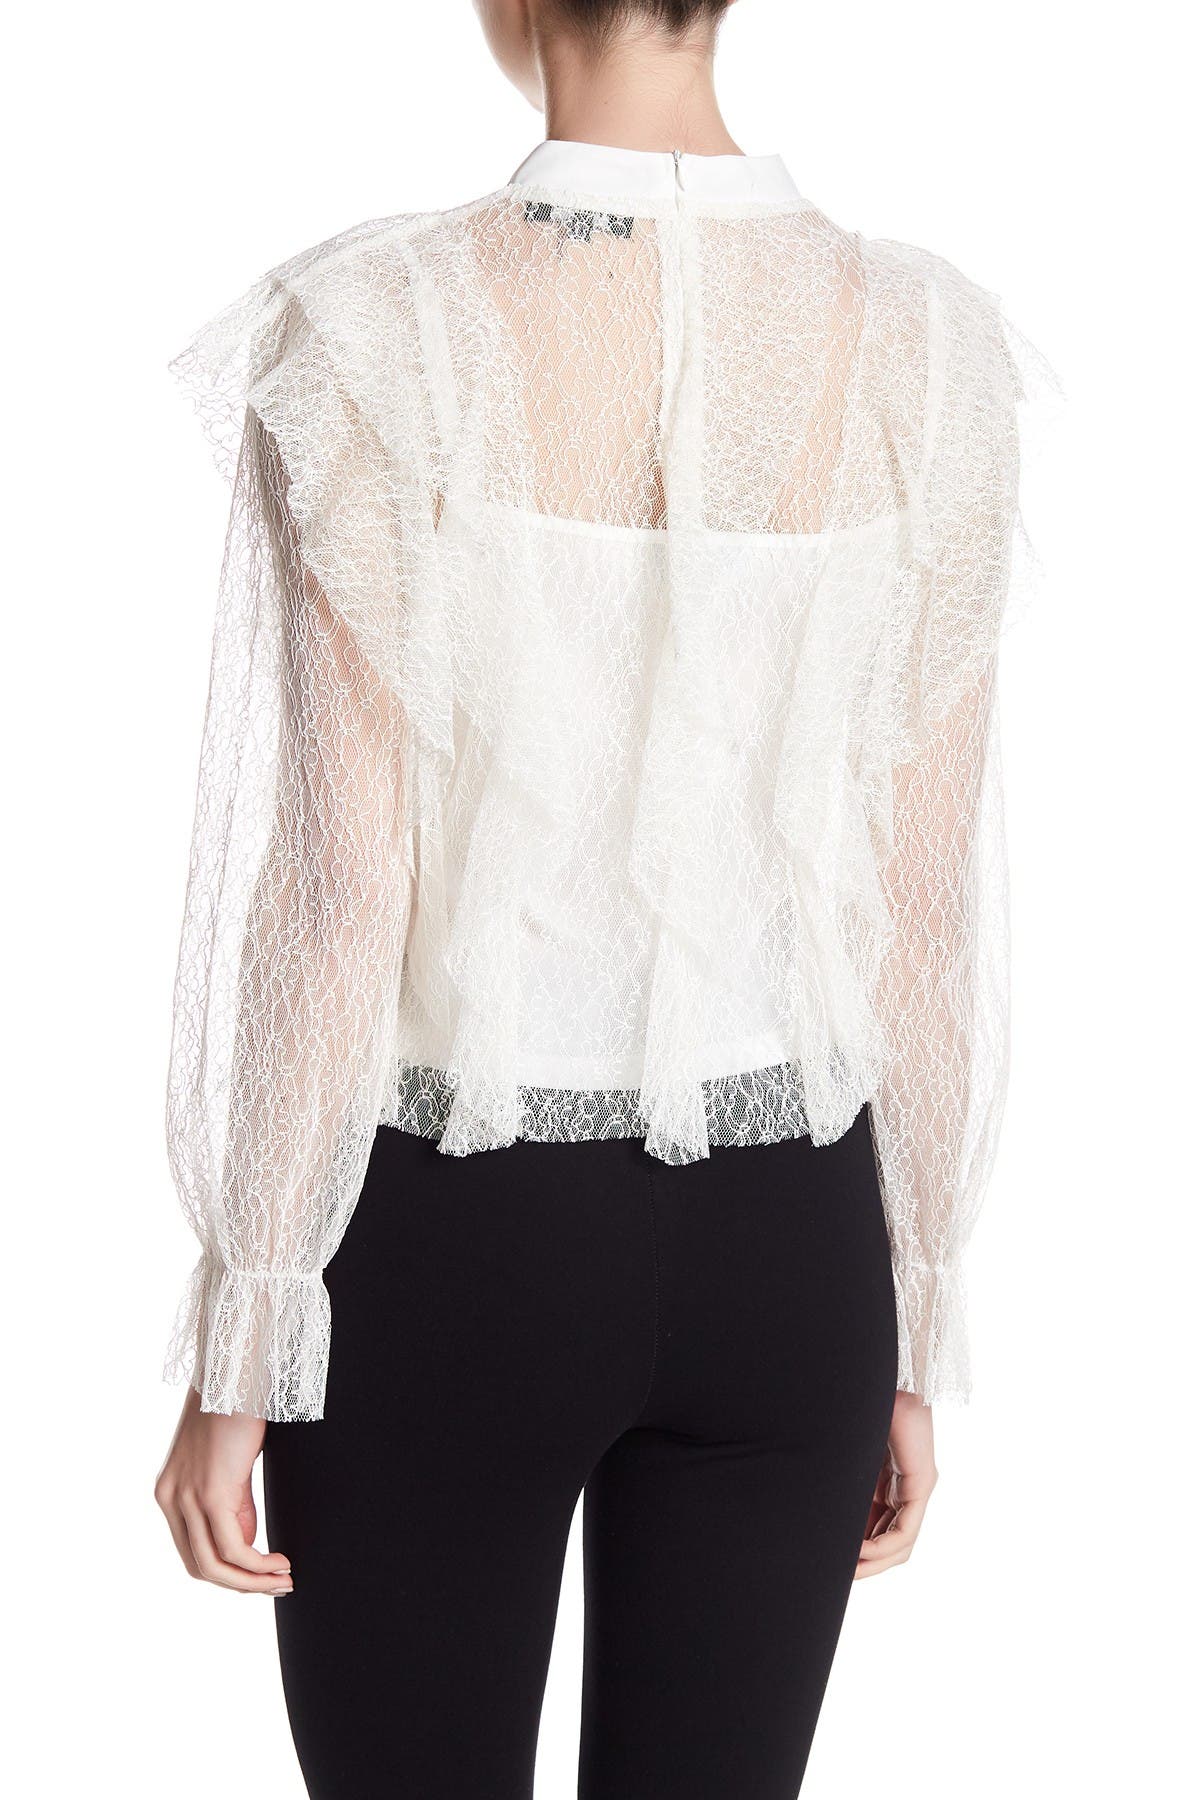 Gracia | Sheer Lace High Neck Blouse | Nordstrom Rack